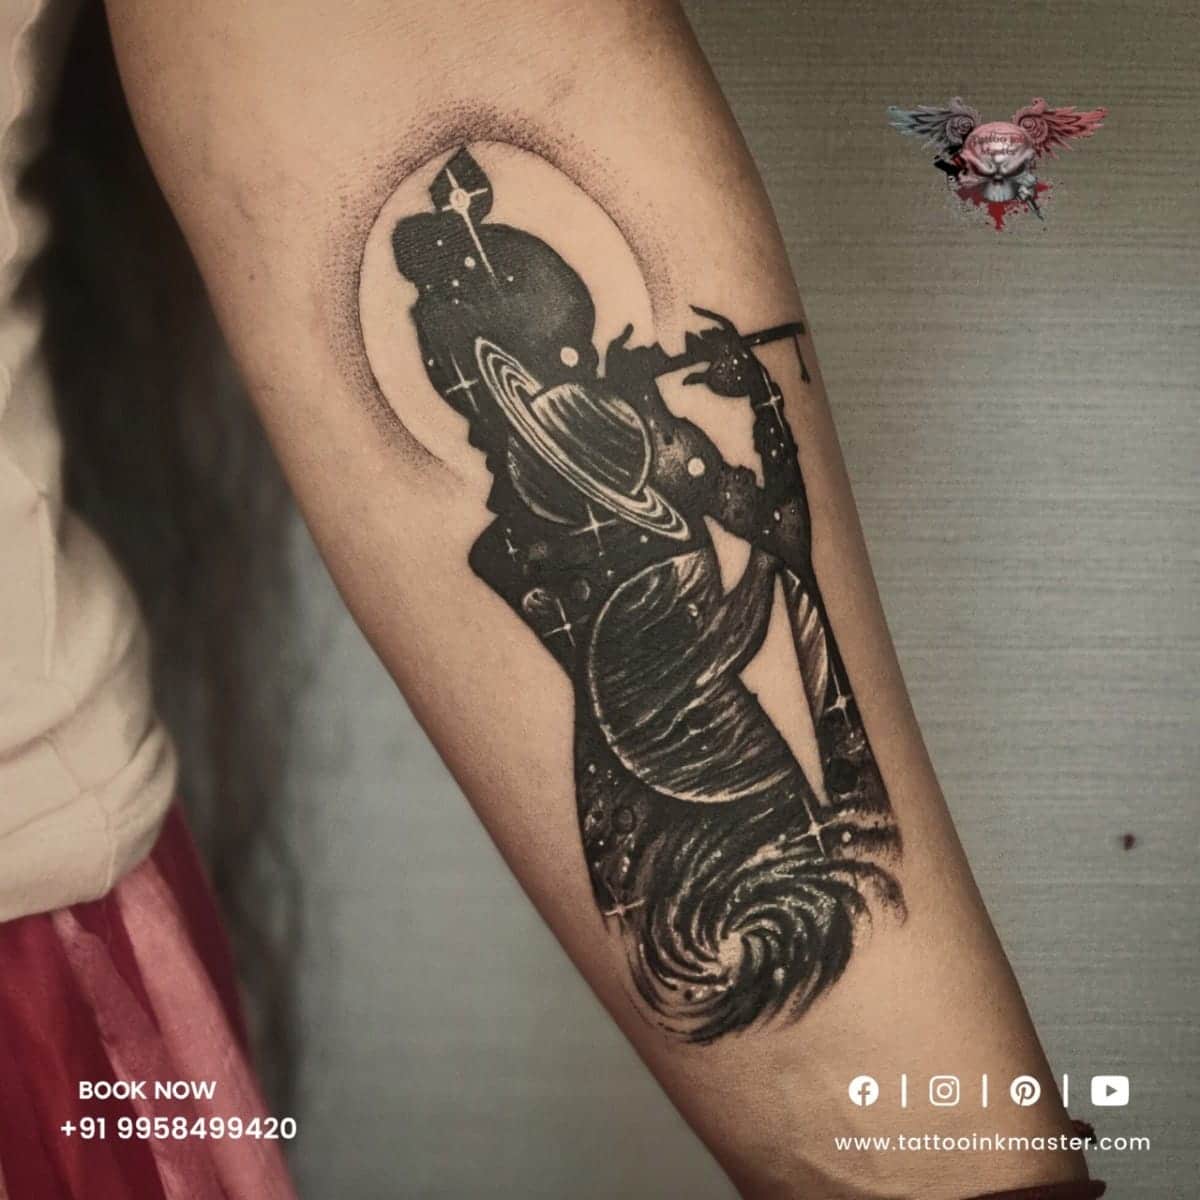 Krishna tattoo #OCTOPUS TATTOO ➖➖➖➖➖➖➖ ➖➖➖ Only book and appointment  cl-9015784690.(WhatsApp) Follow Insta-octopustattoomilan ⚓️more… | Instagram